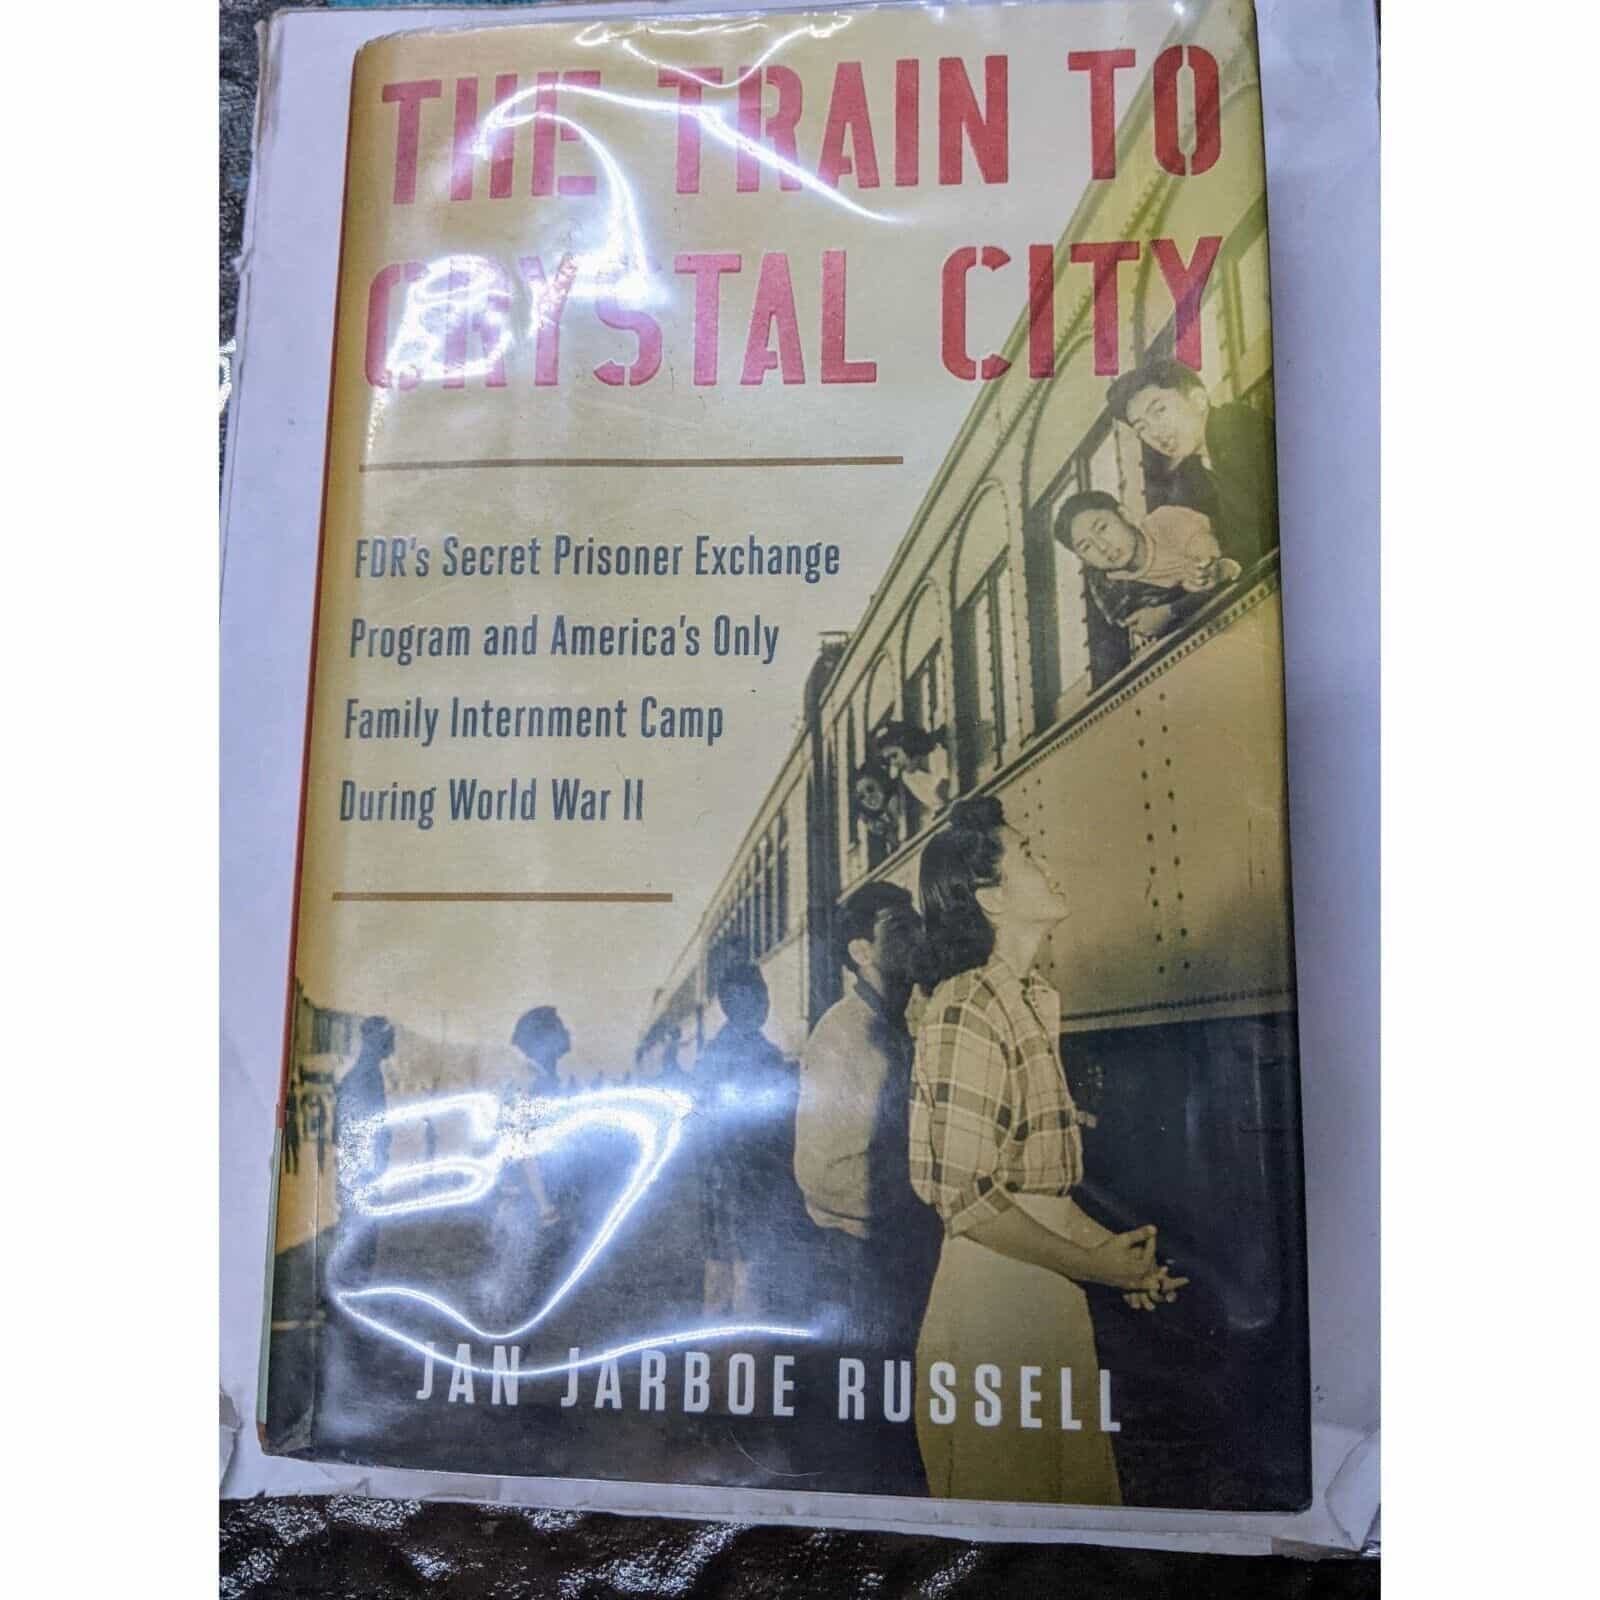 The Train To Crystal City by Jan Jarboe Russell Book